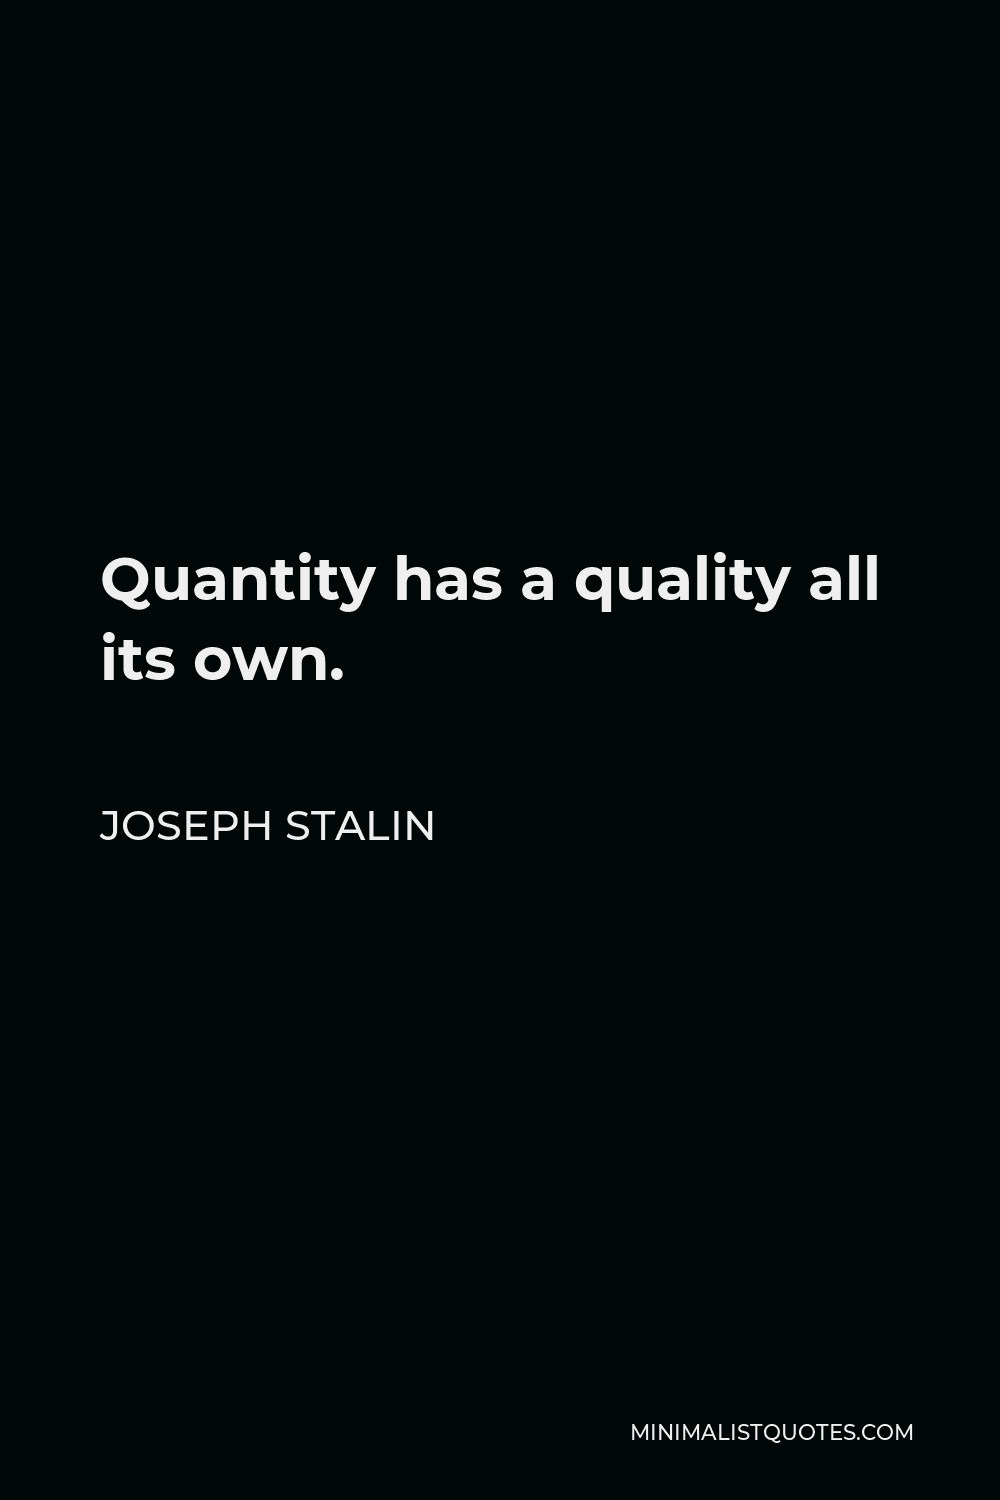 Joseph Stalin Quote - Quantity has a quality all its own.